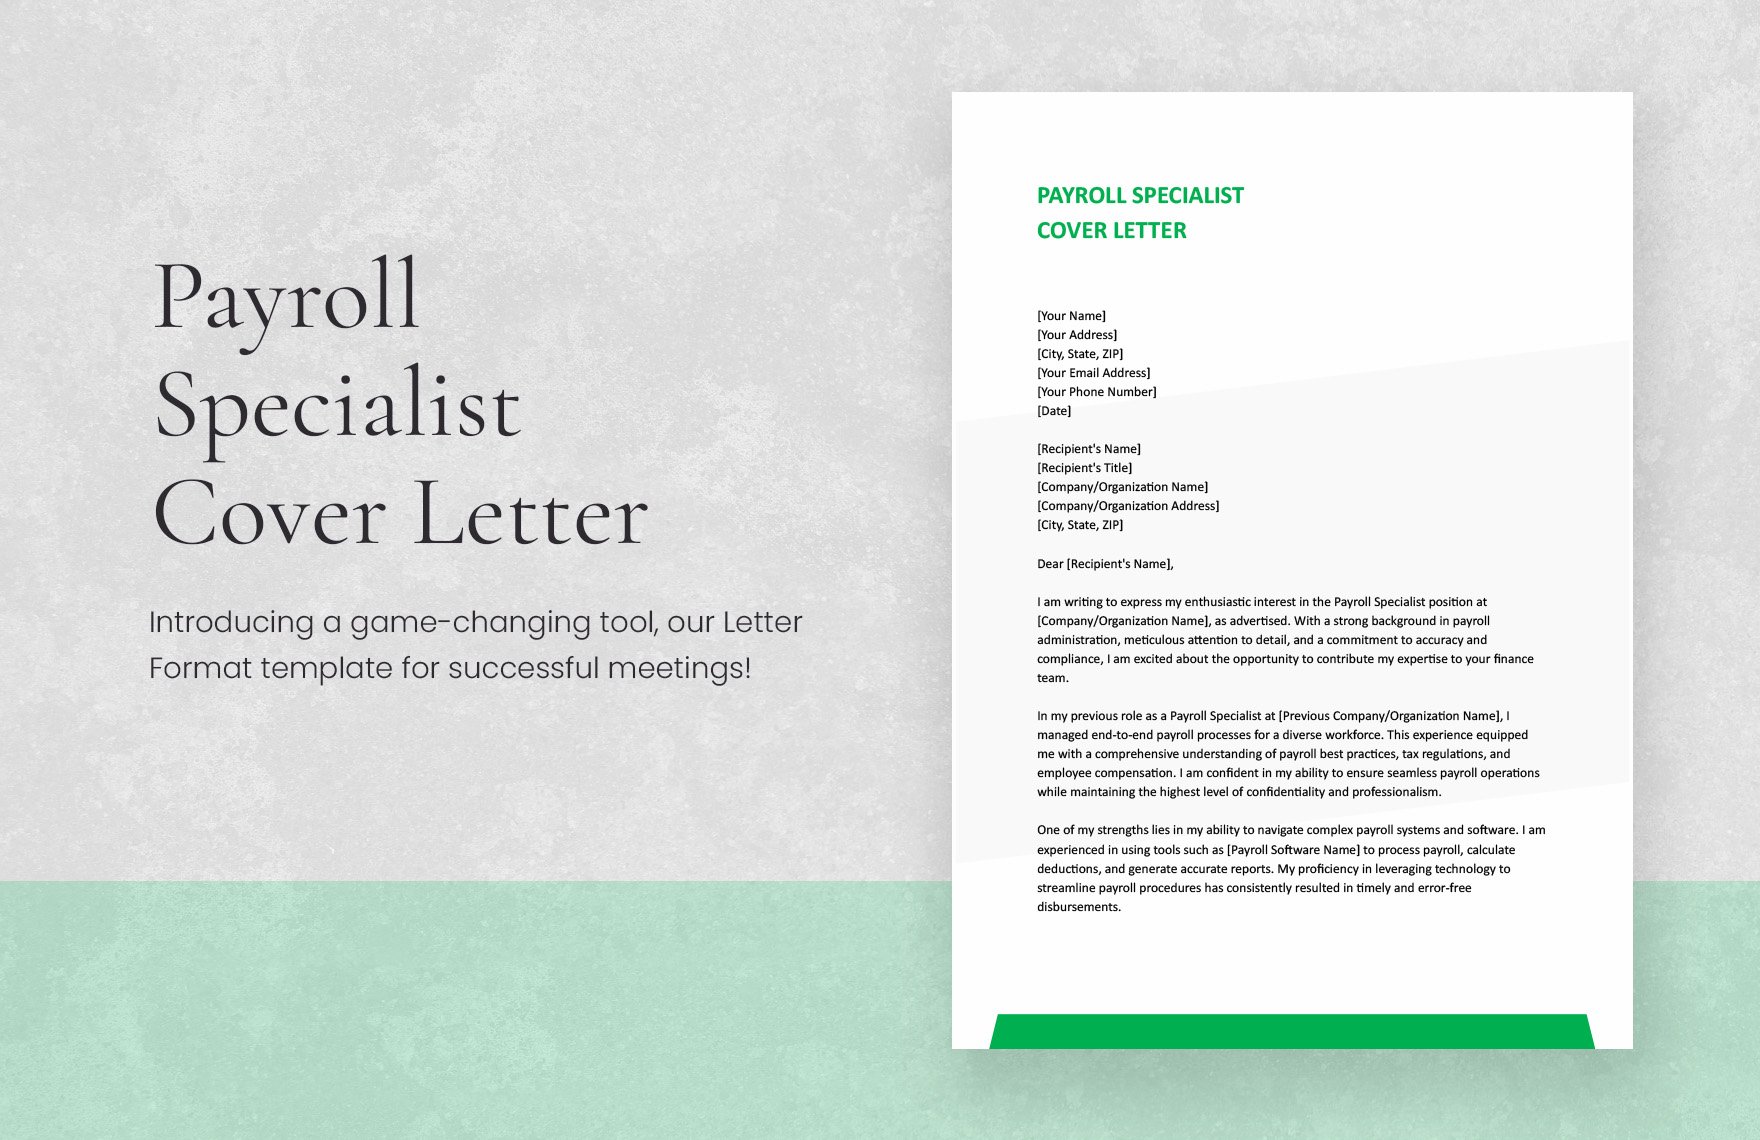 Free Payroll Specialist Cover Letter - Download in Word, Google Docs ...